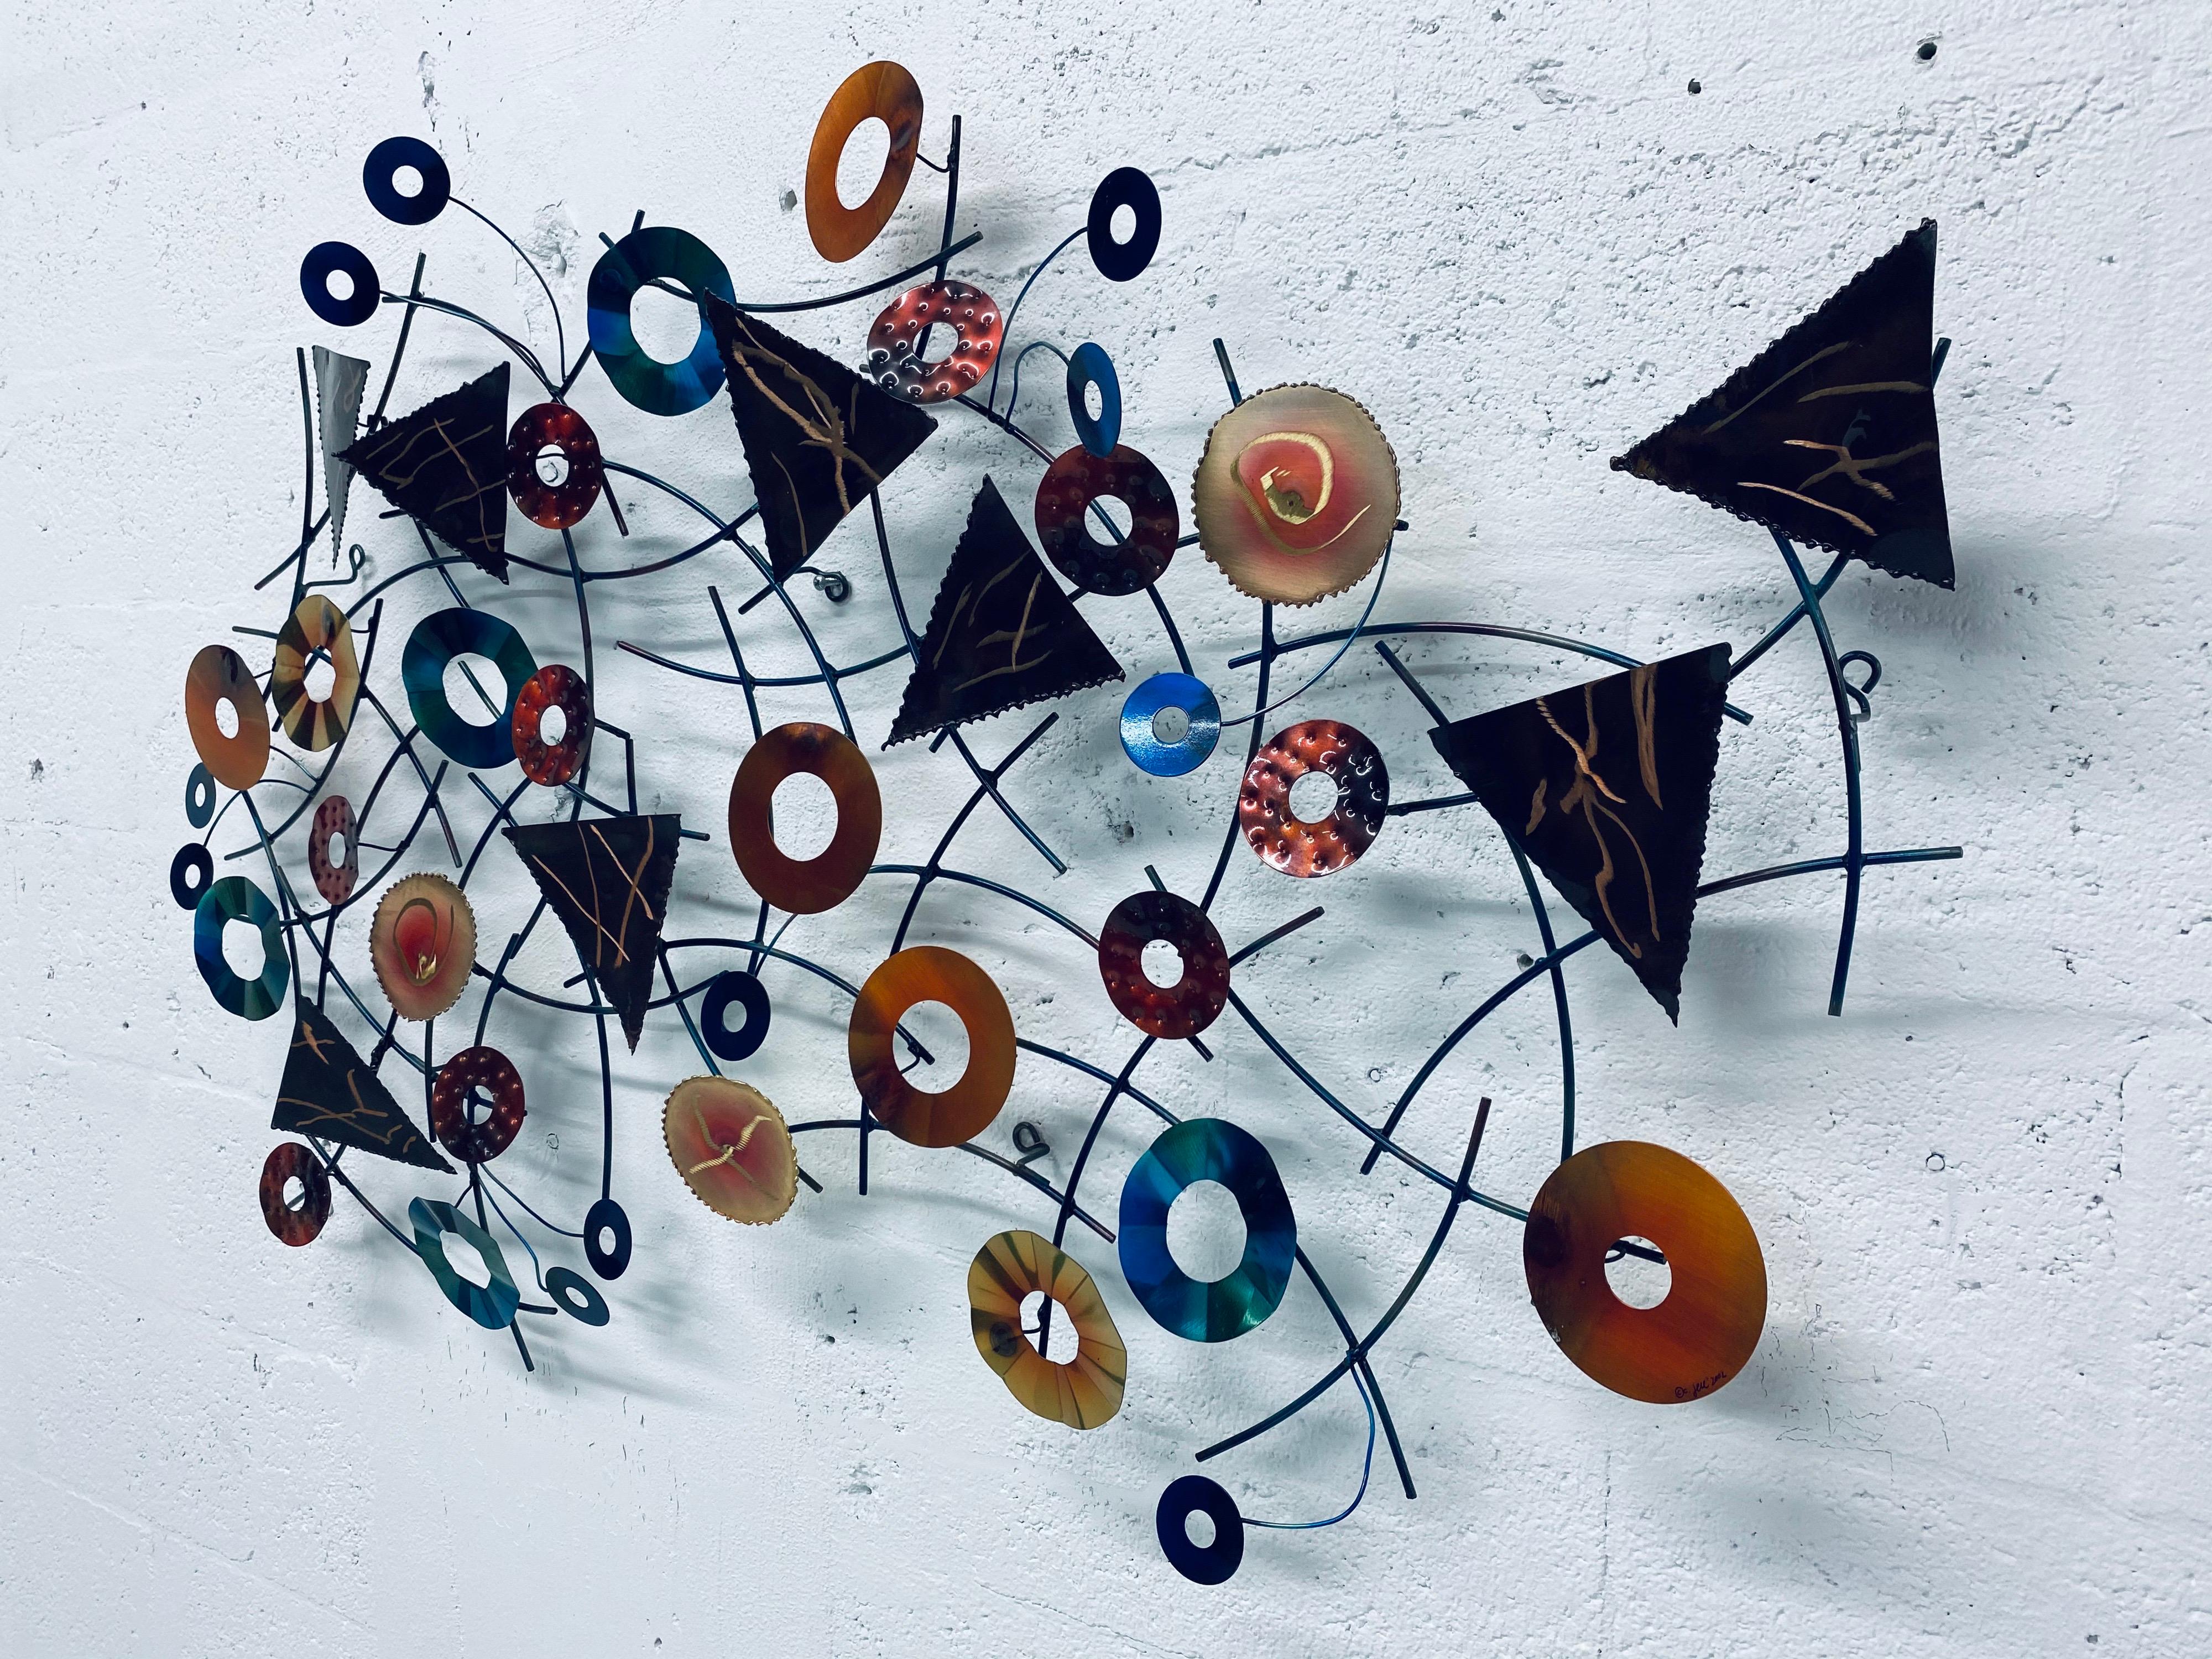 Contemporary mixed-media wall art sculpture fabricated by the artisan house Curtis Jere (C. Jere Artisan House). Dated 2002.